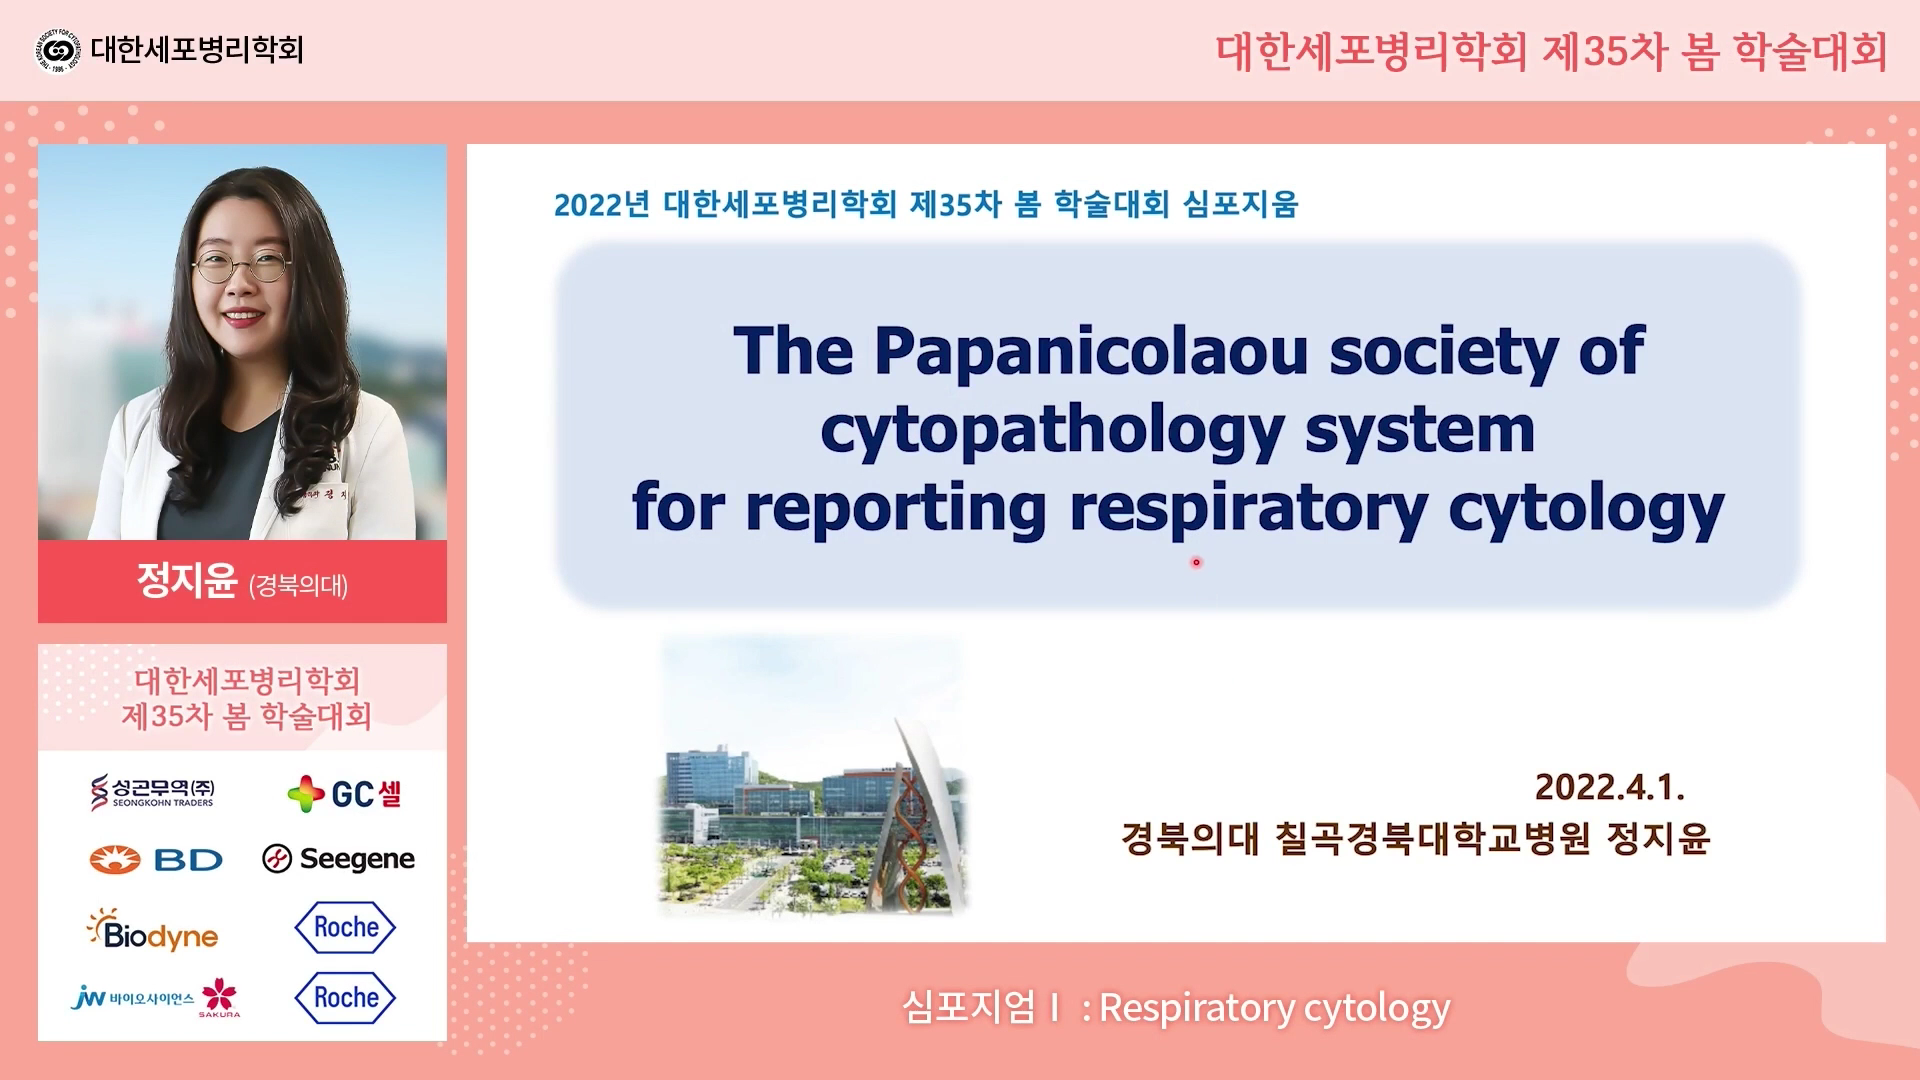 The Papanicolaou society of cytopathology system for reporting respiratory cytology